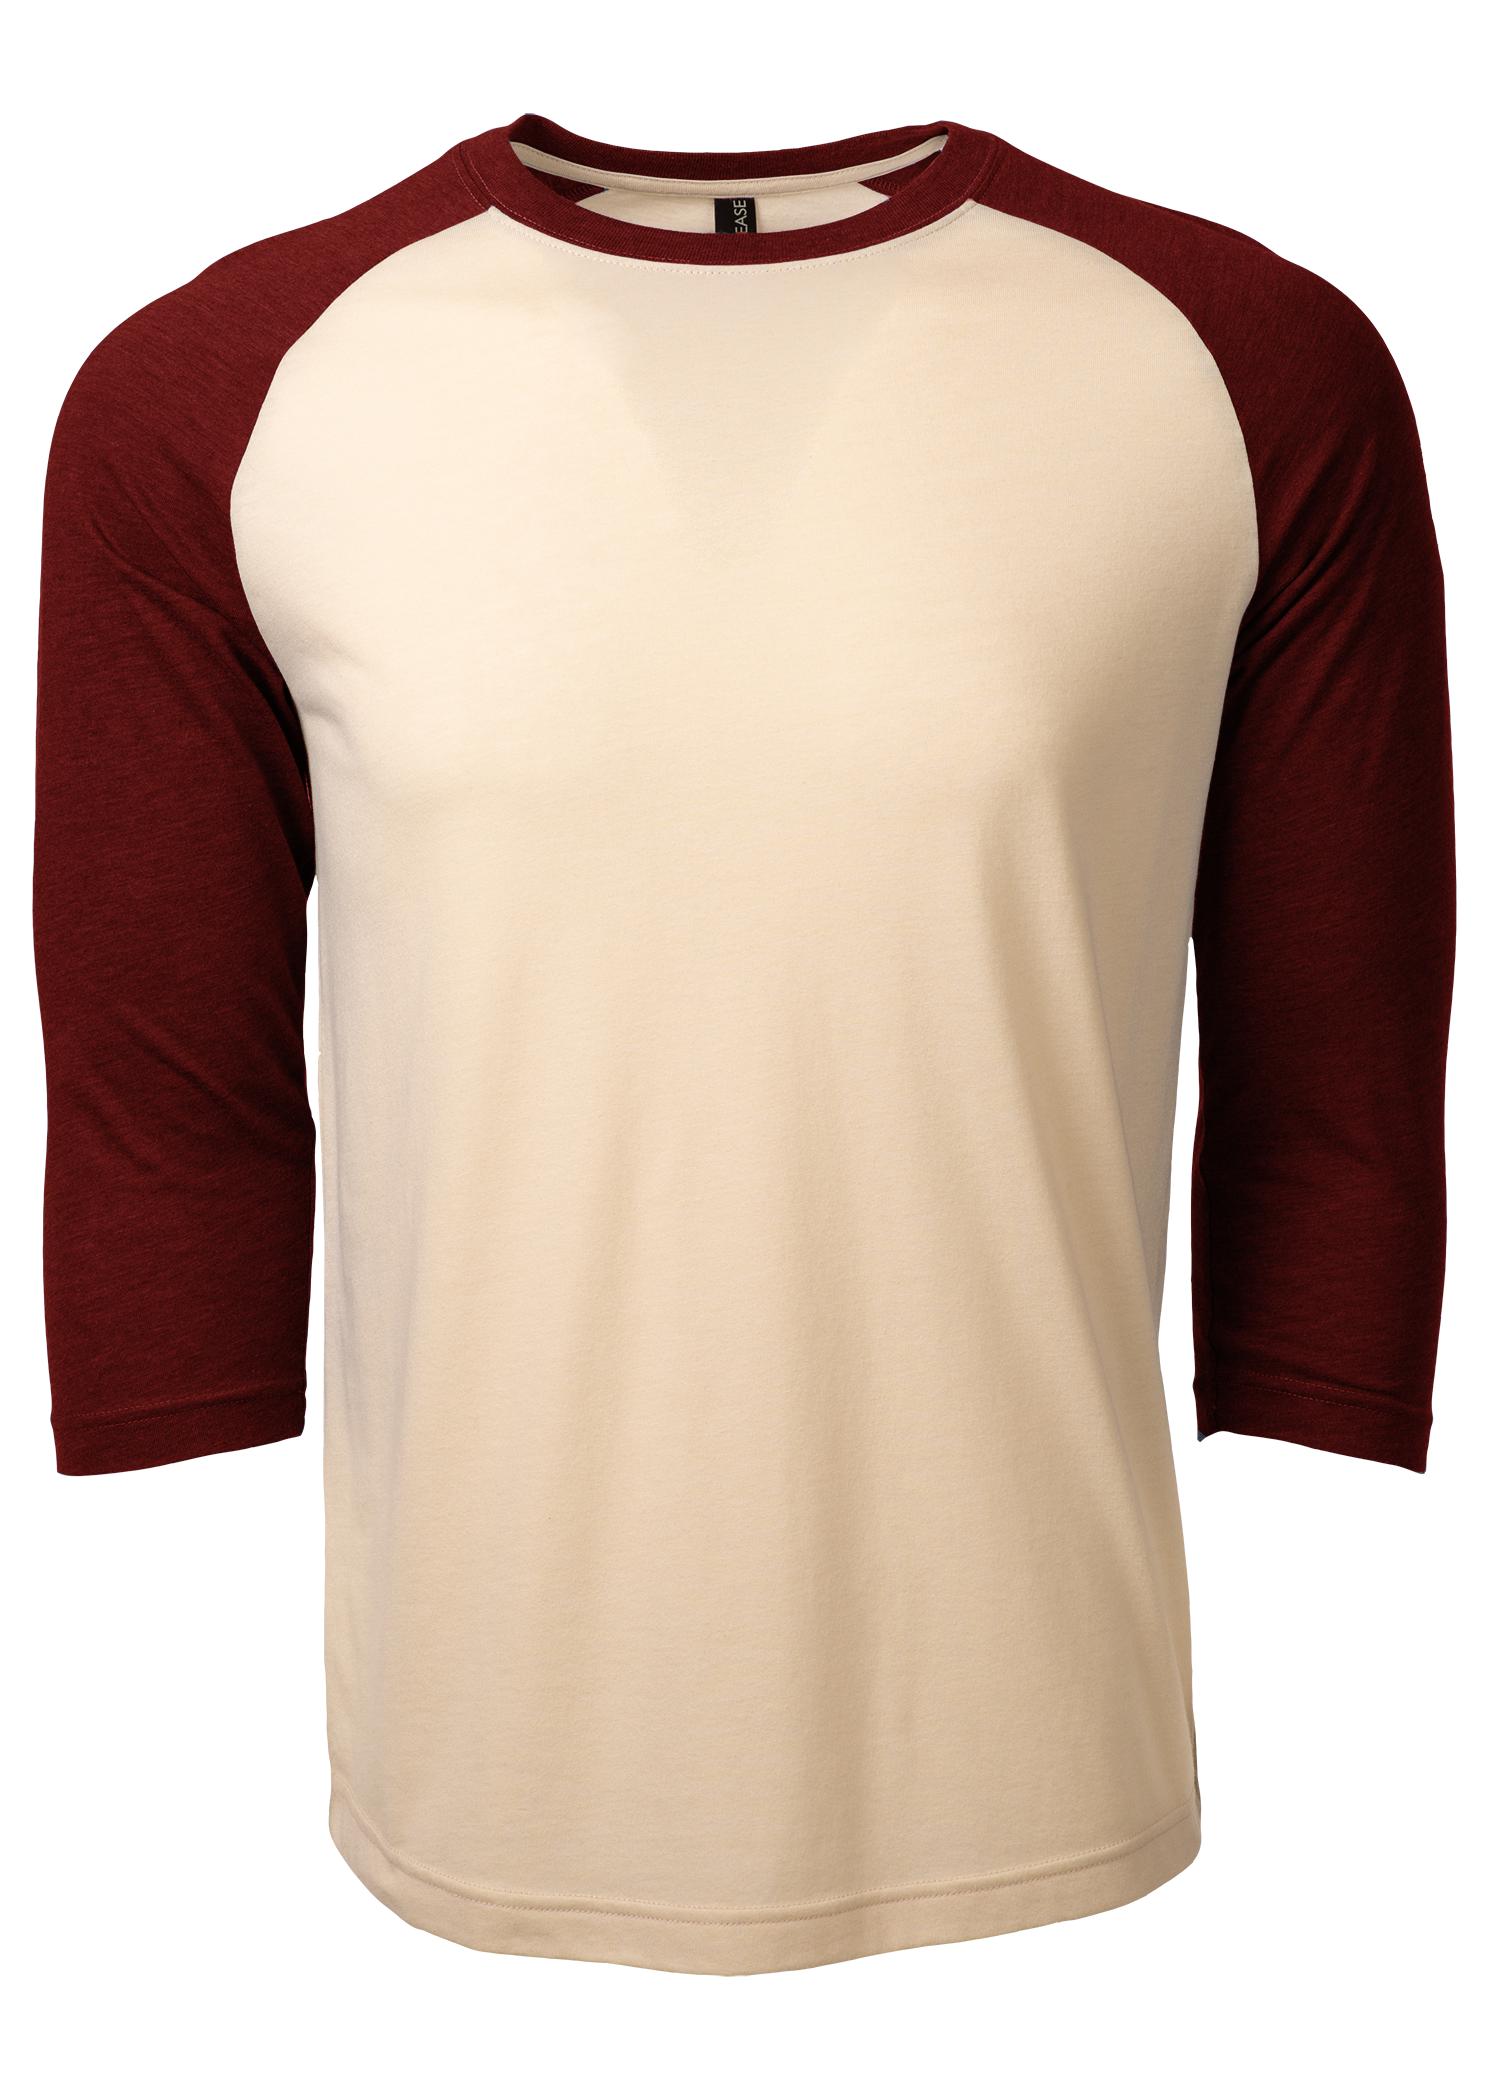 click to view Oatmeal Heather/Black Cherry Heather